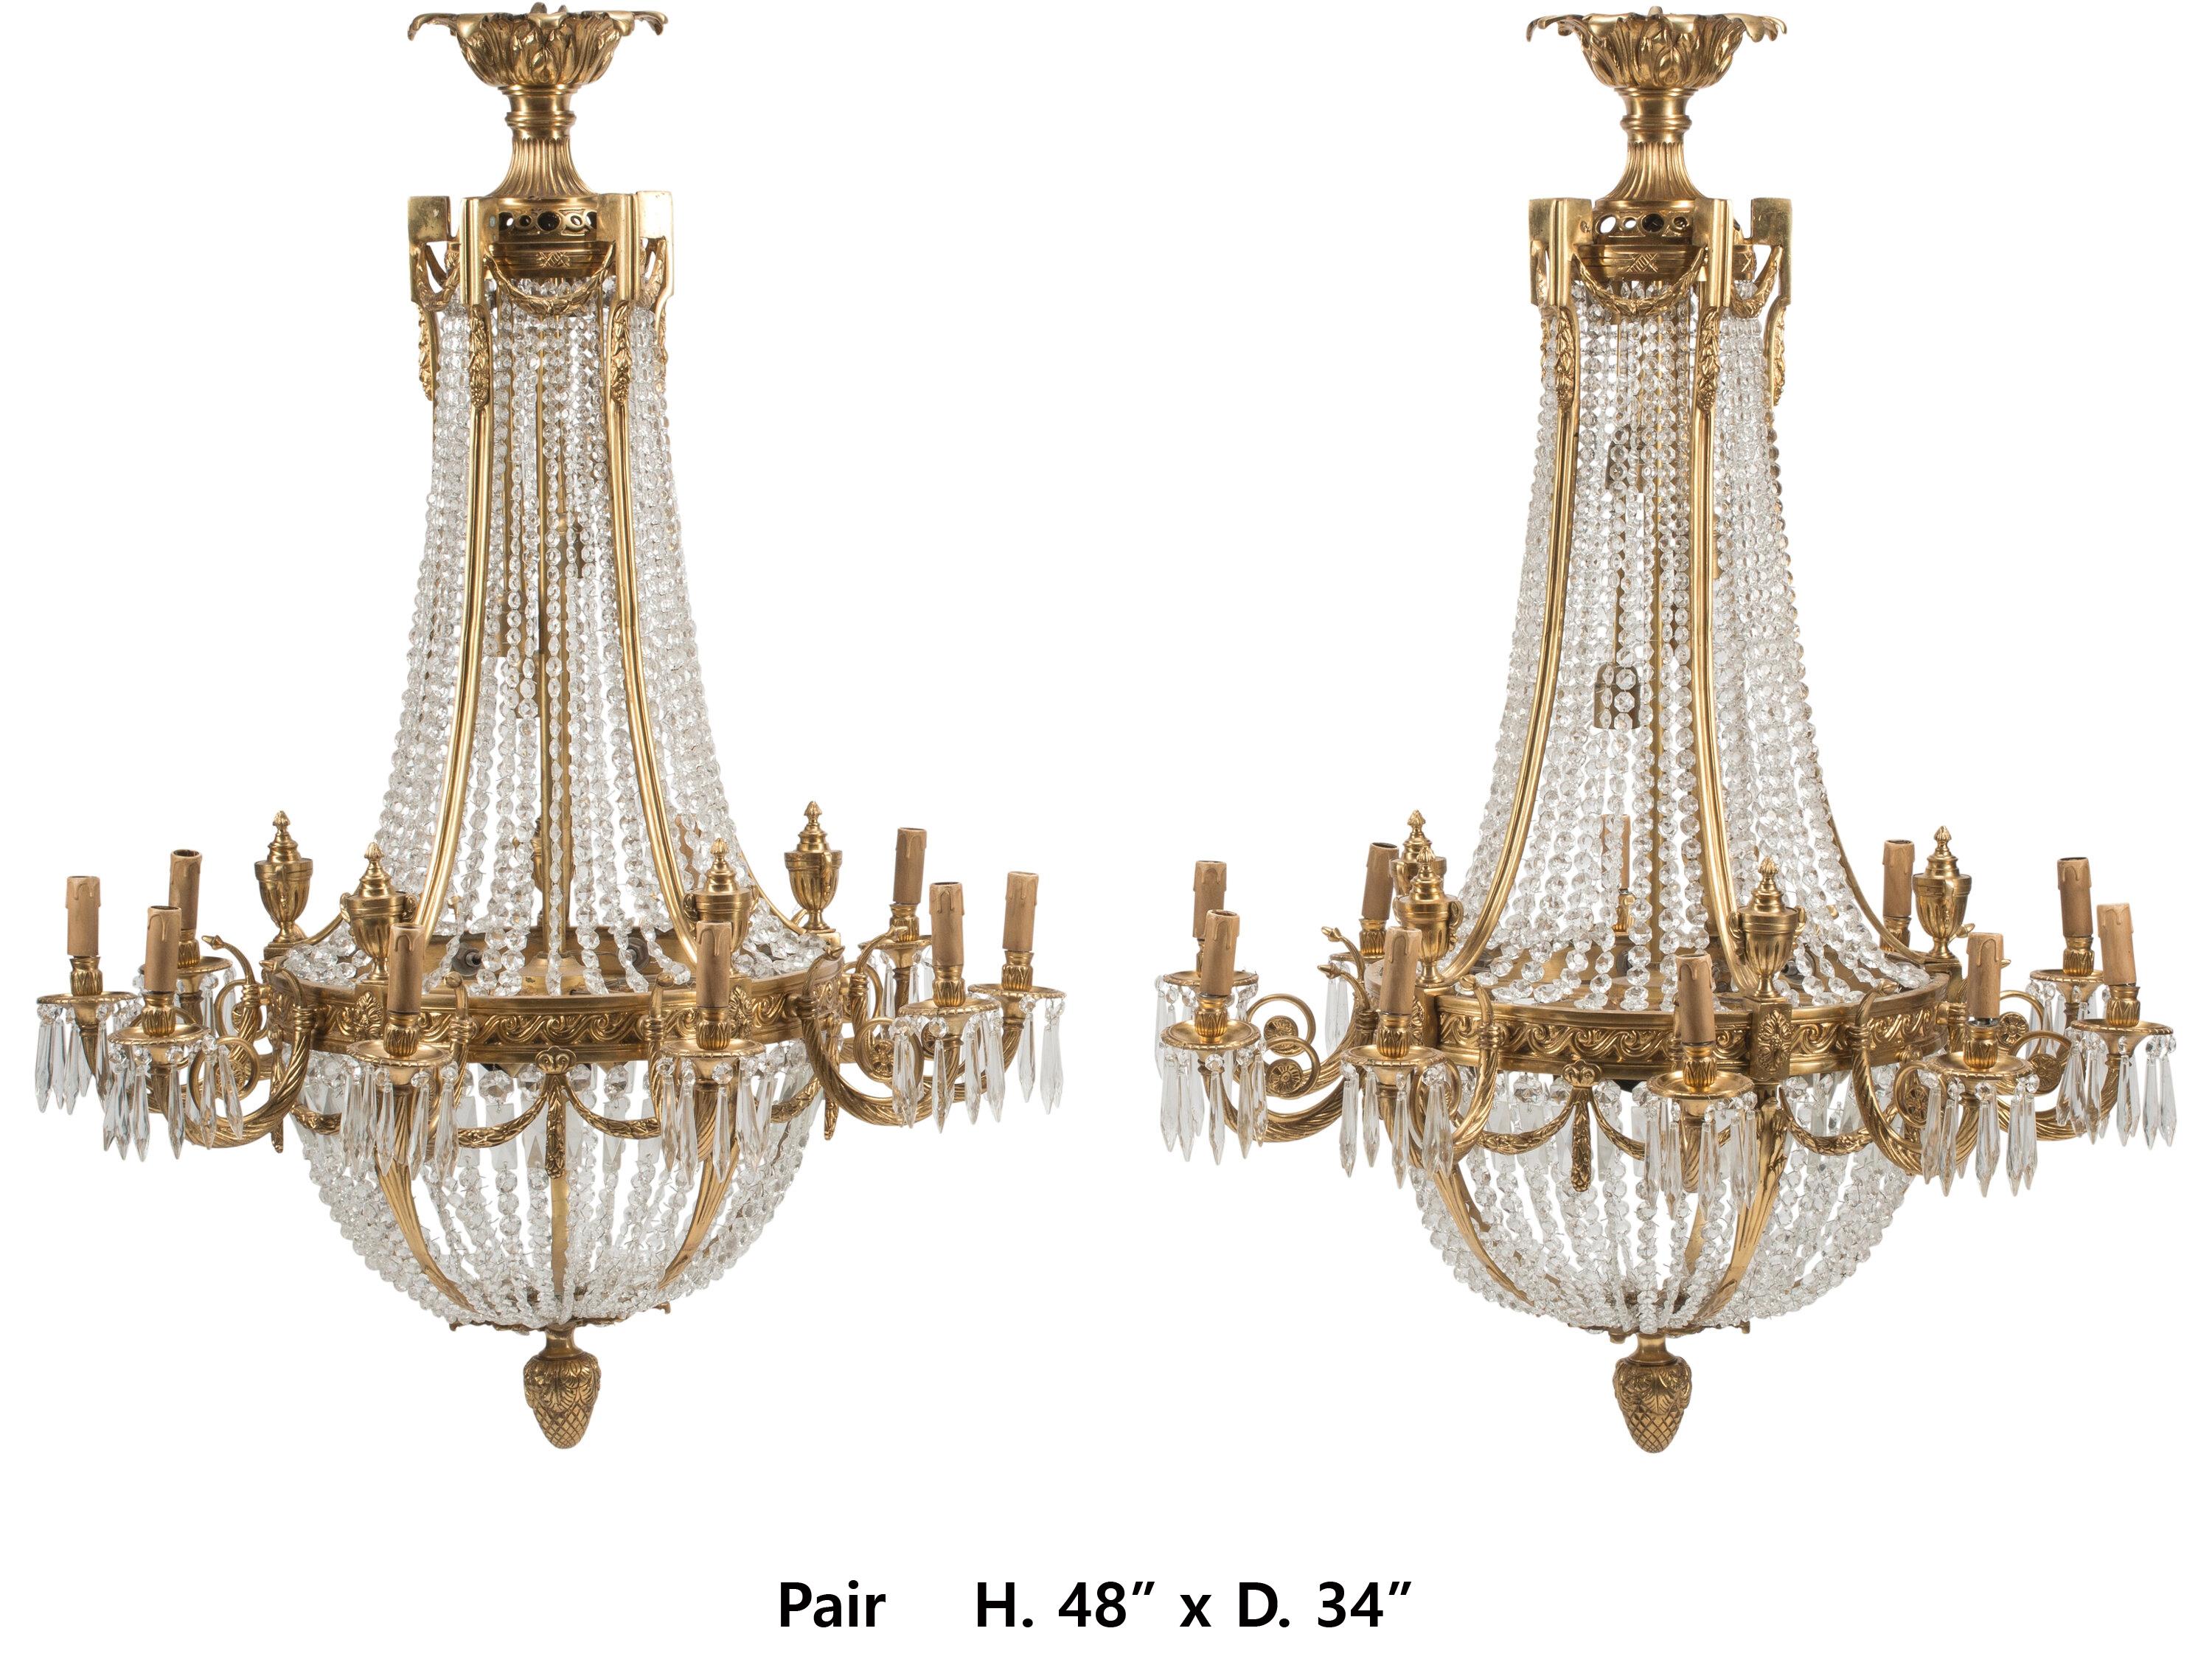 Impressive Pair of French Neoclassical-Style Gilt Bronze and Crystal Ten-Light chandeliers.
48 x 34 inches
